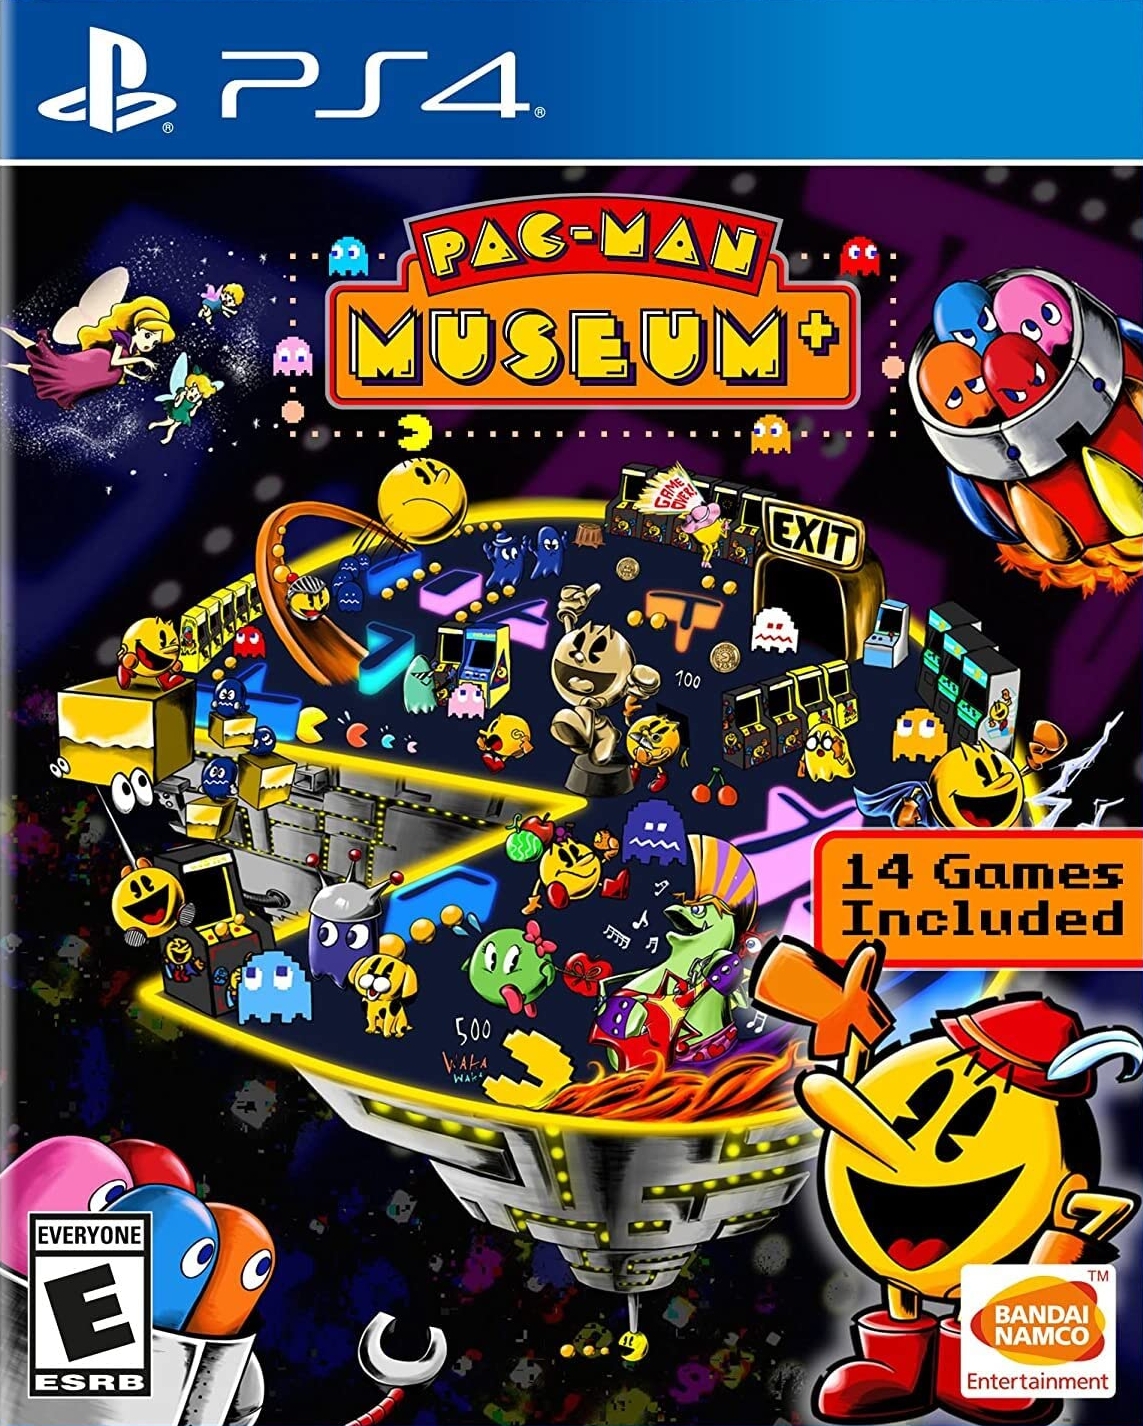 TGDB - Browse - Game - Pac-Man Museum+